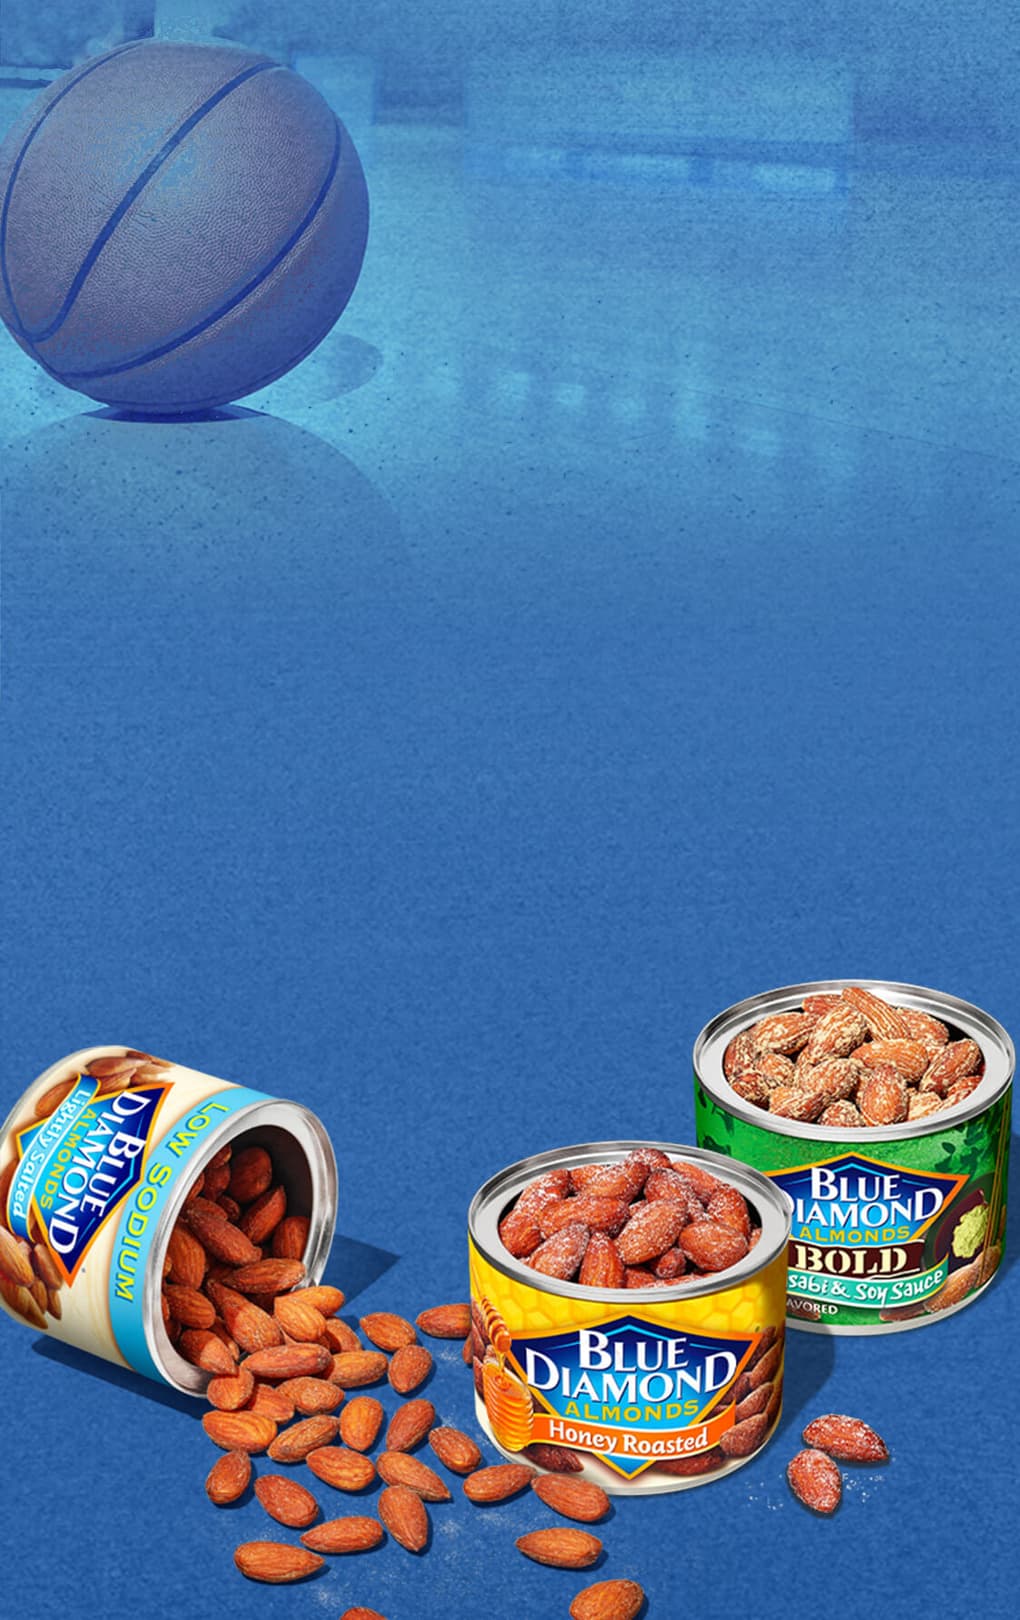 Assorted snack almonds on a basketball court